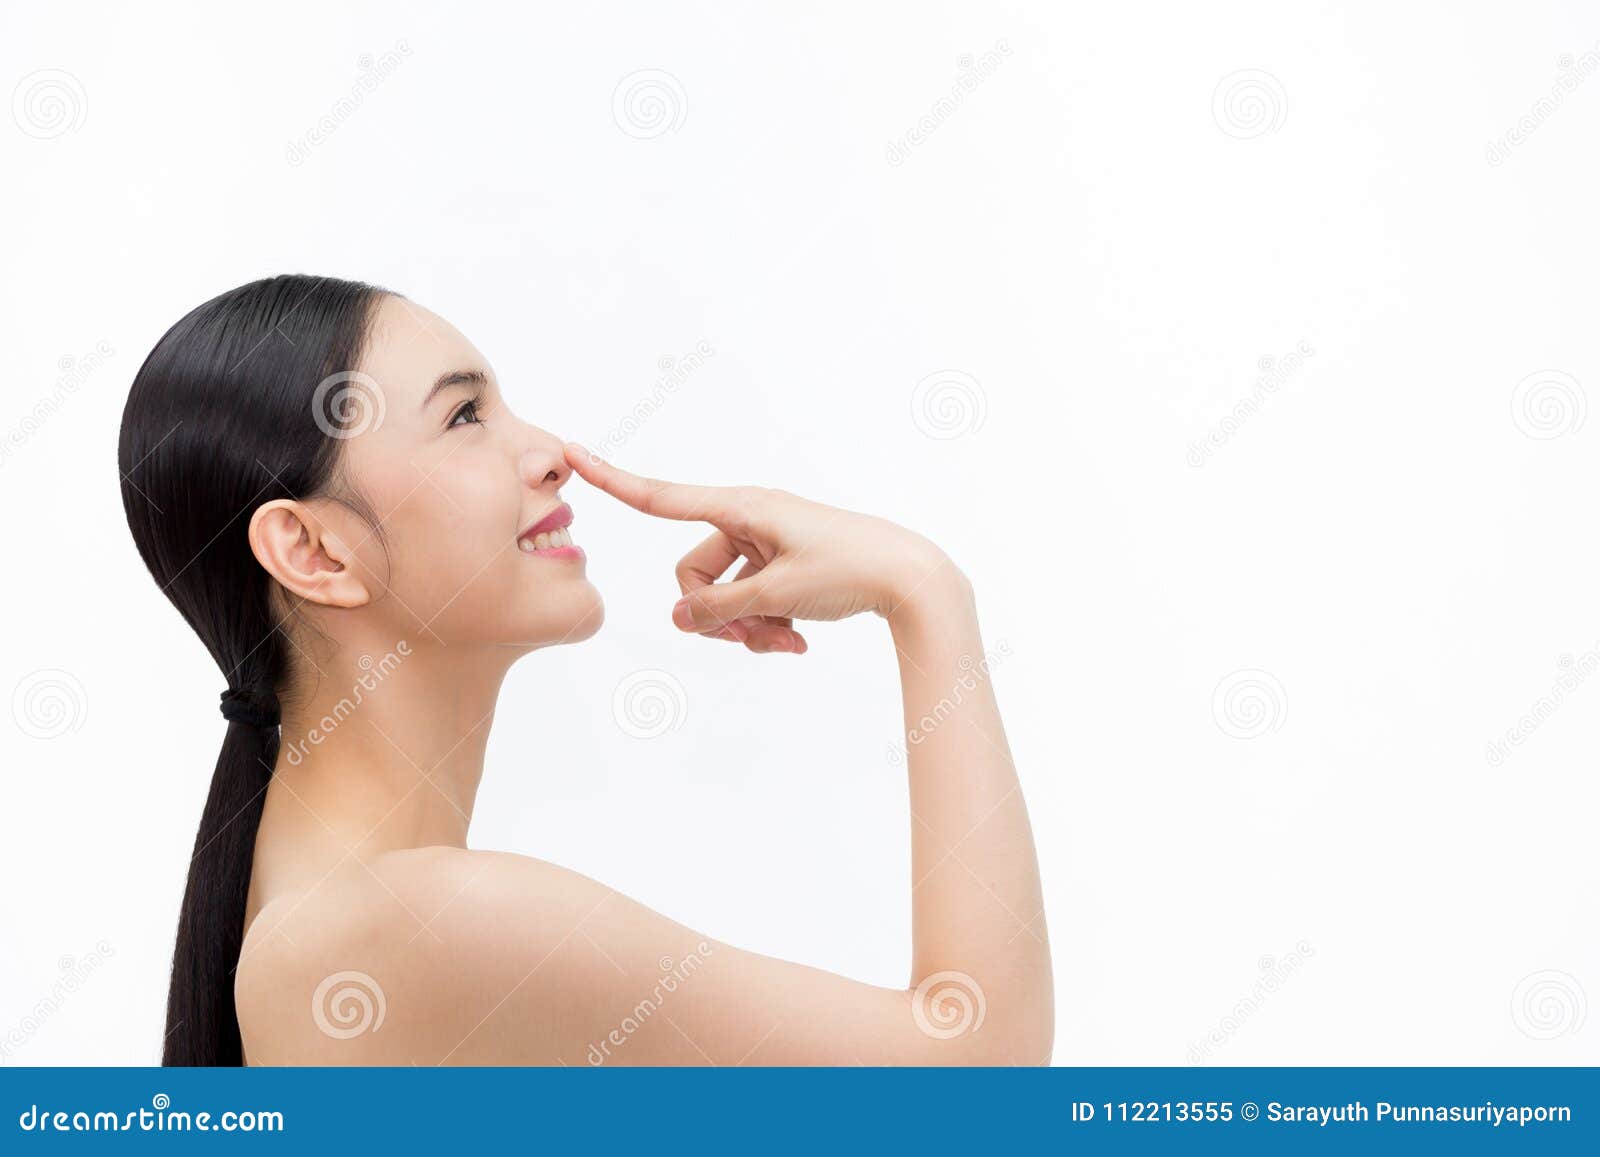 young attractive woman touching her nose with fingertip over  white background